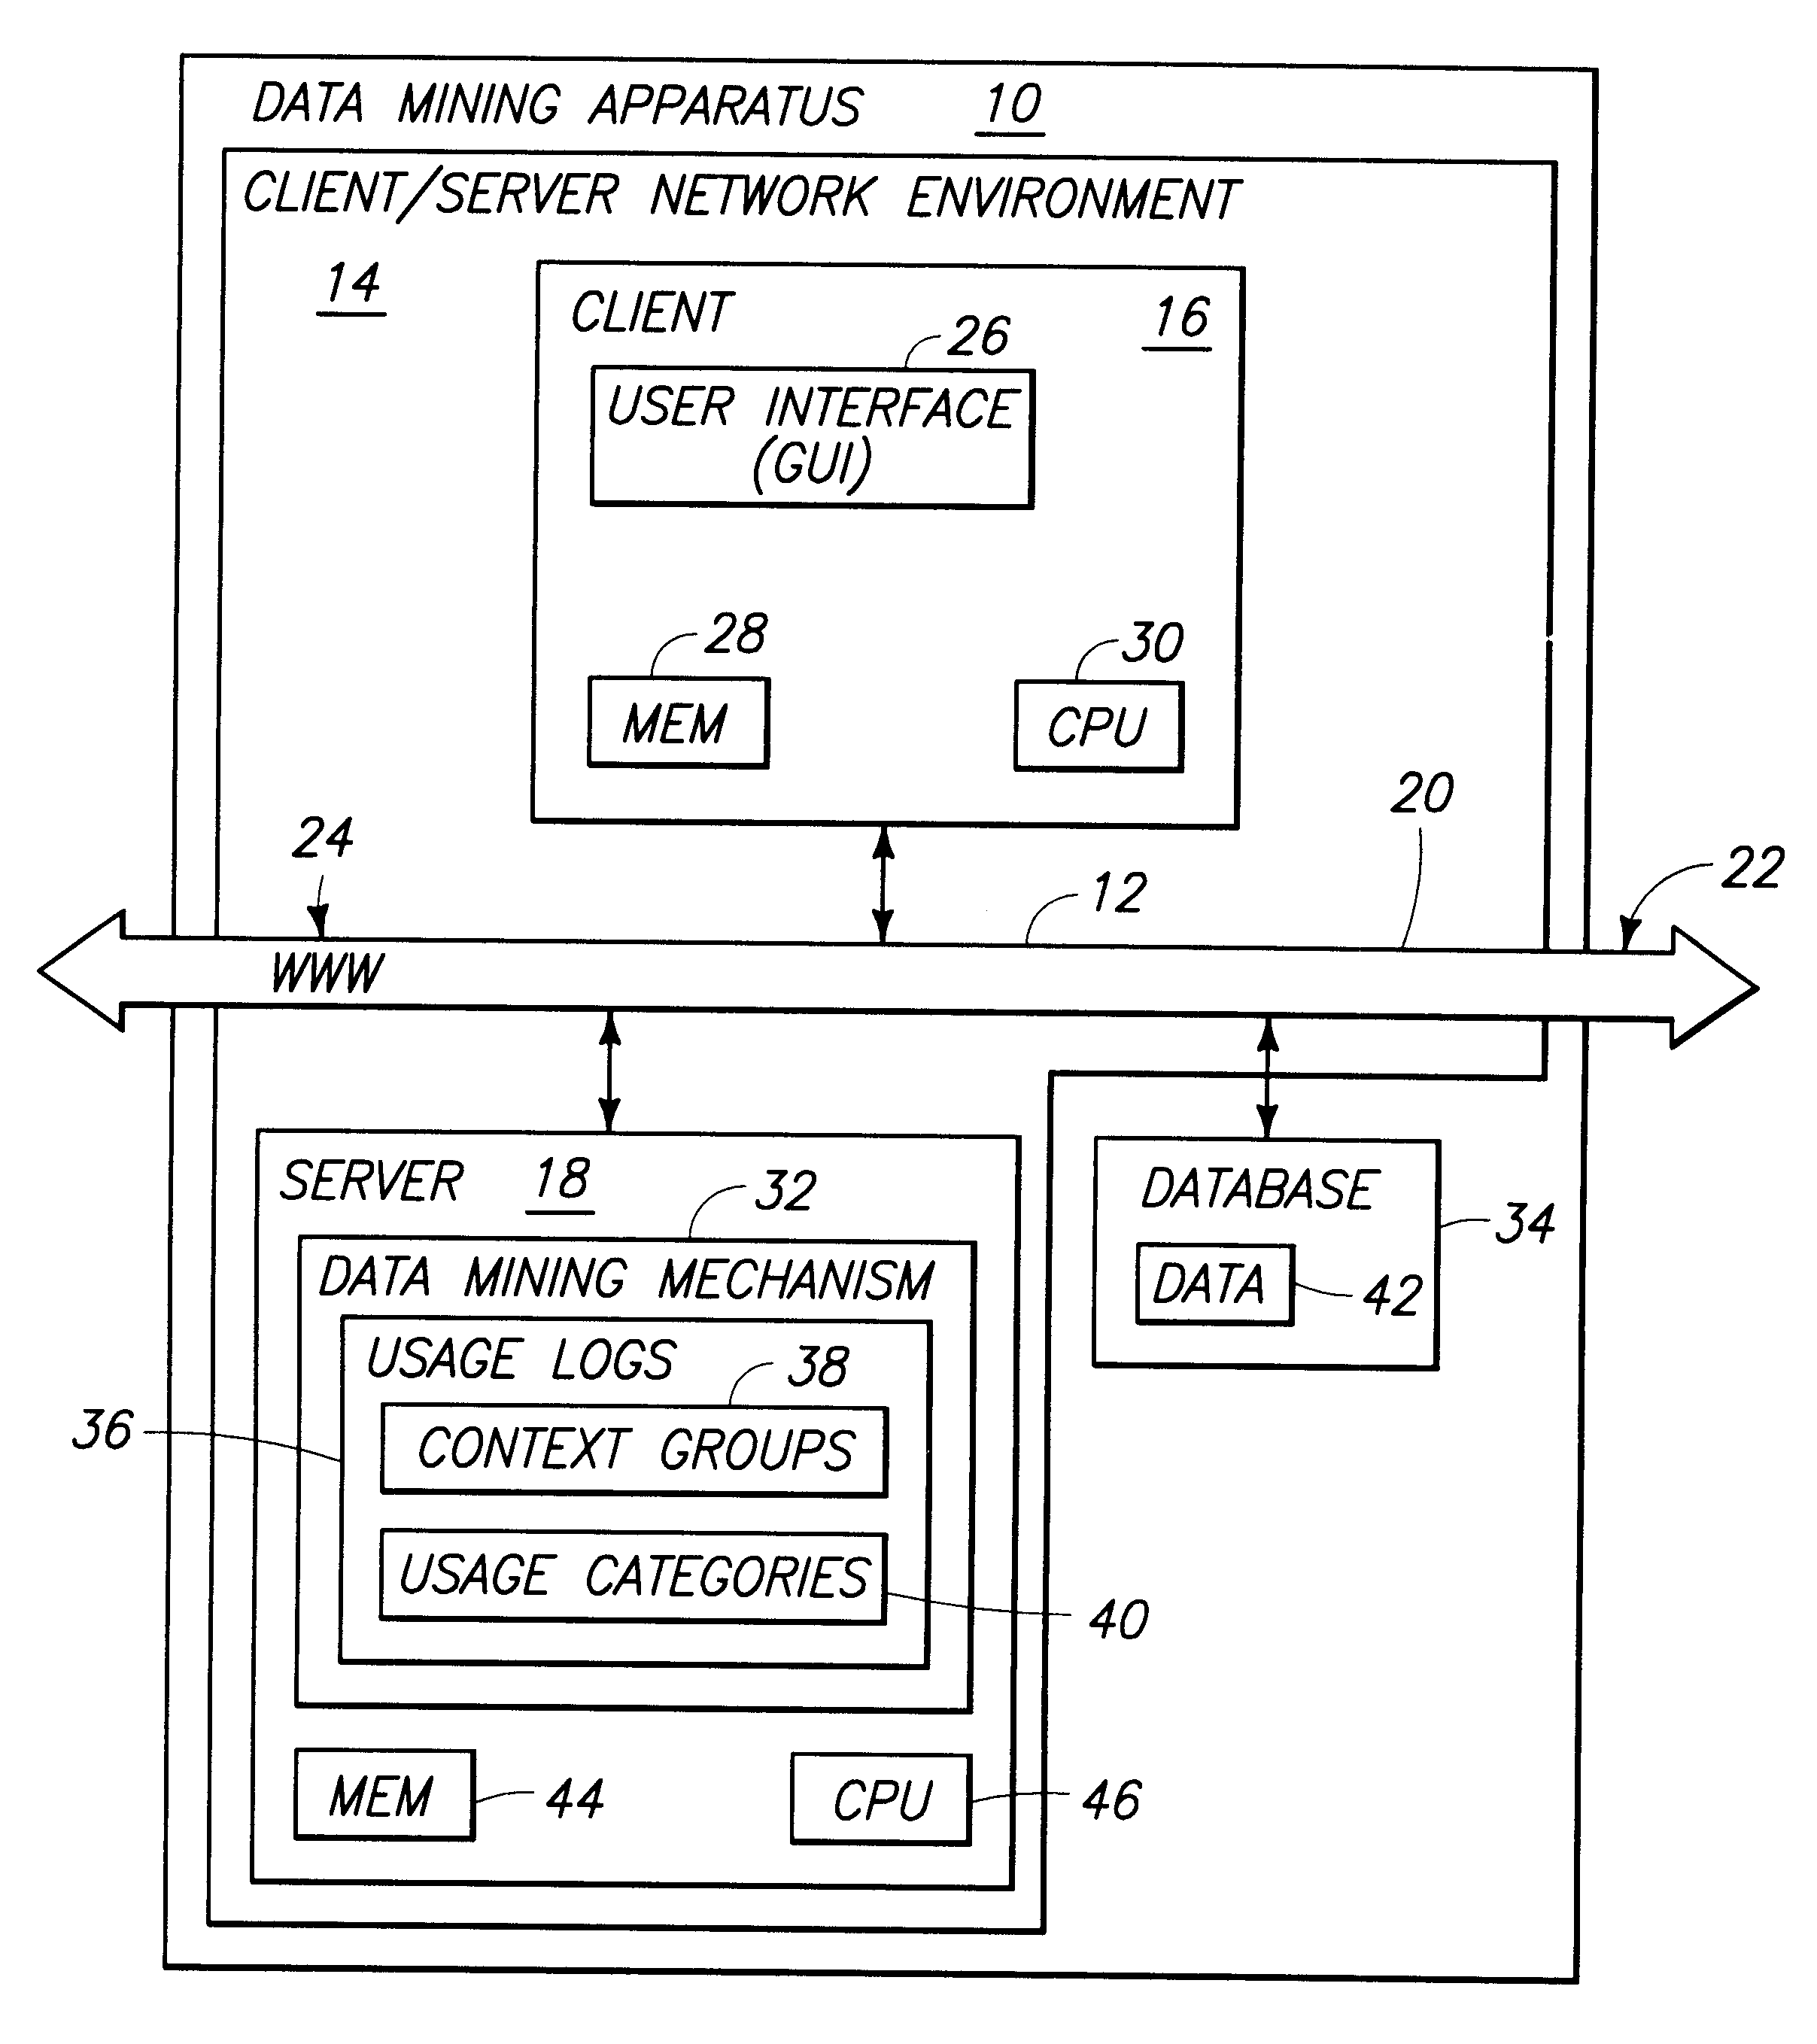 Apparatus and method for discovering context groups and document categories by mining usage logs